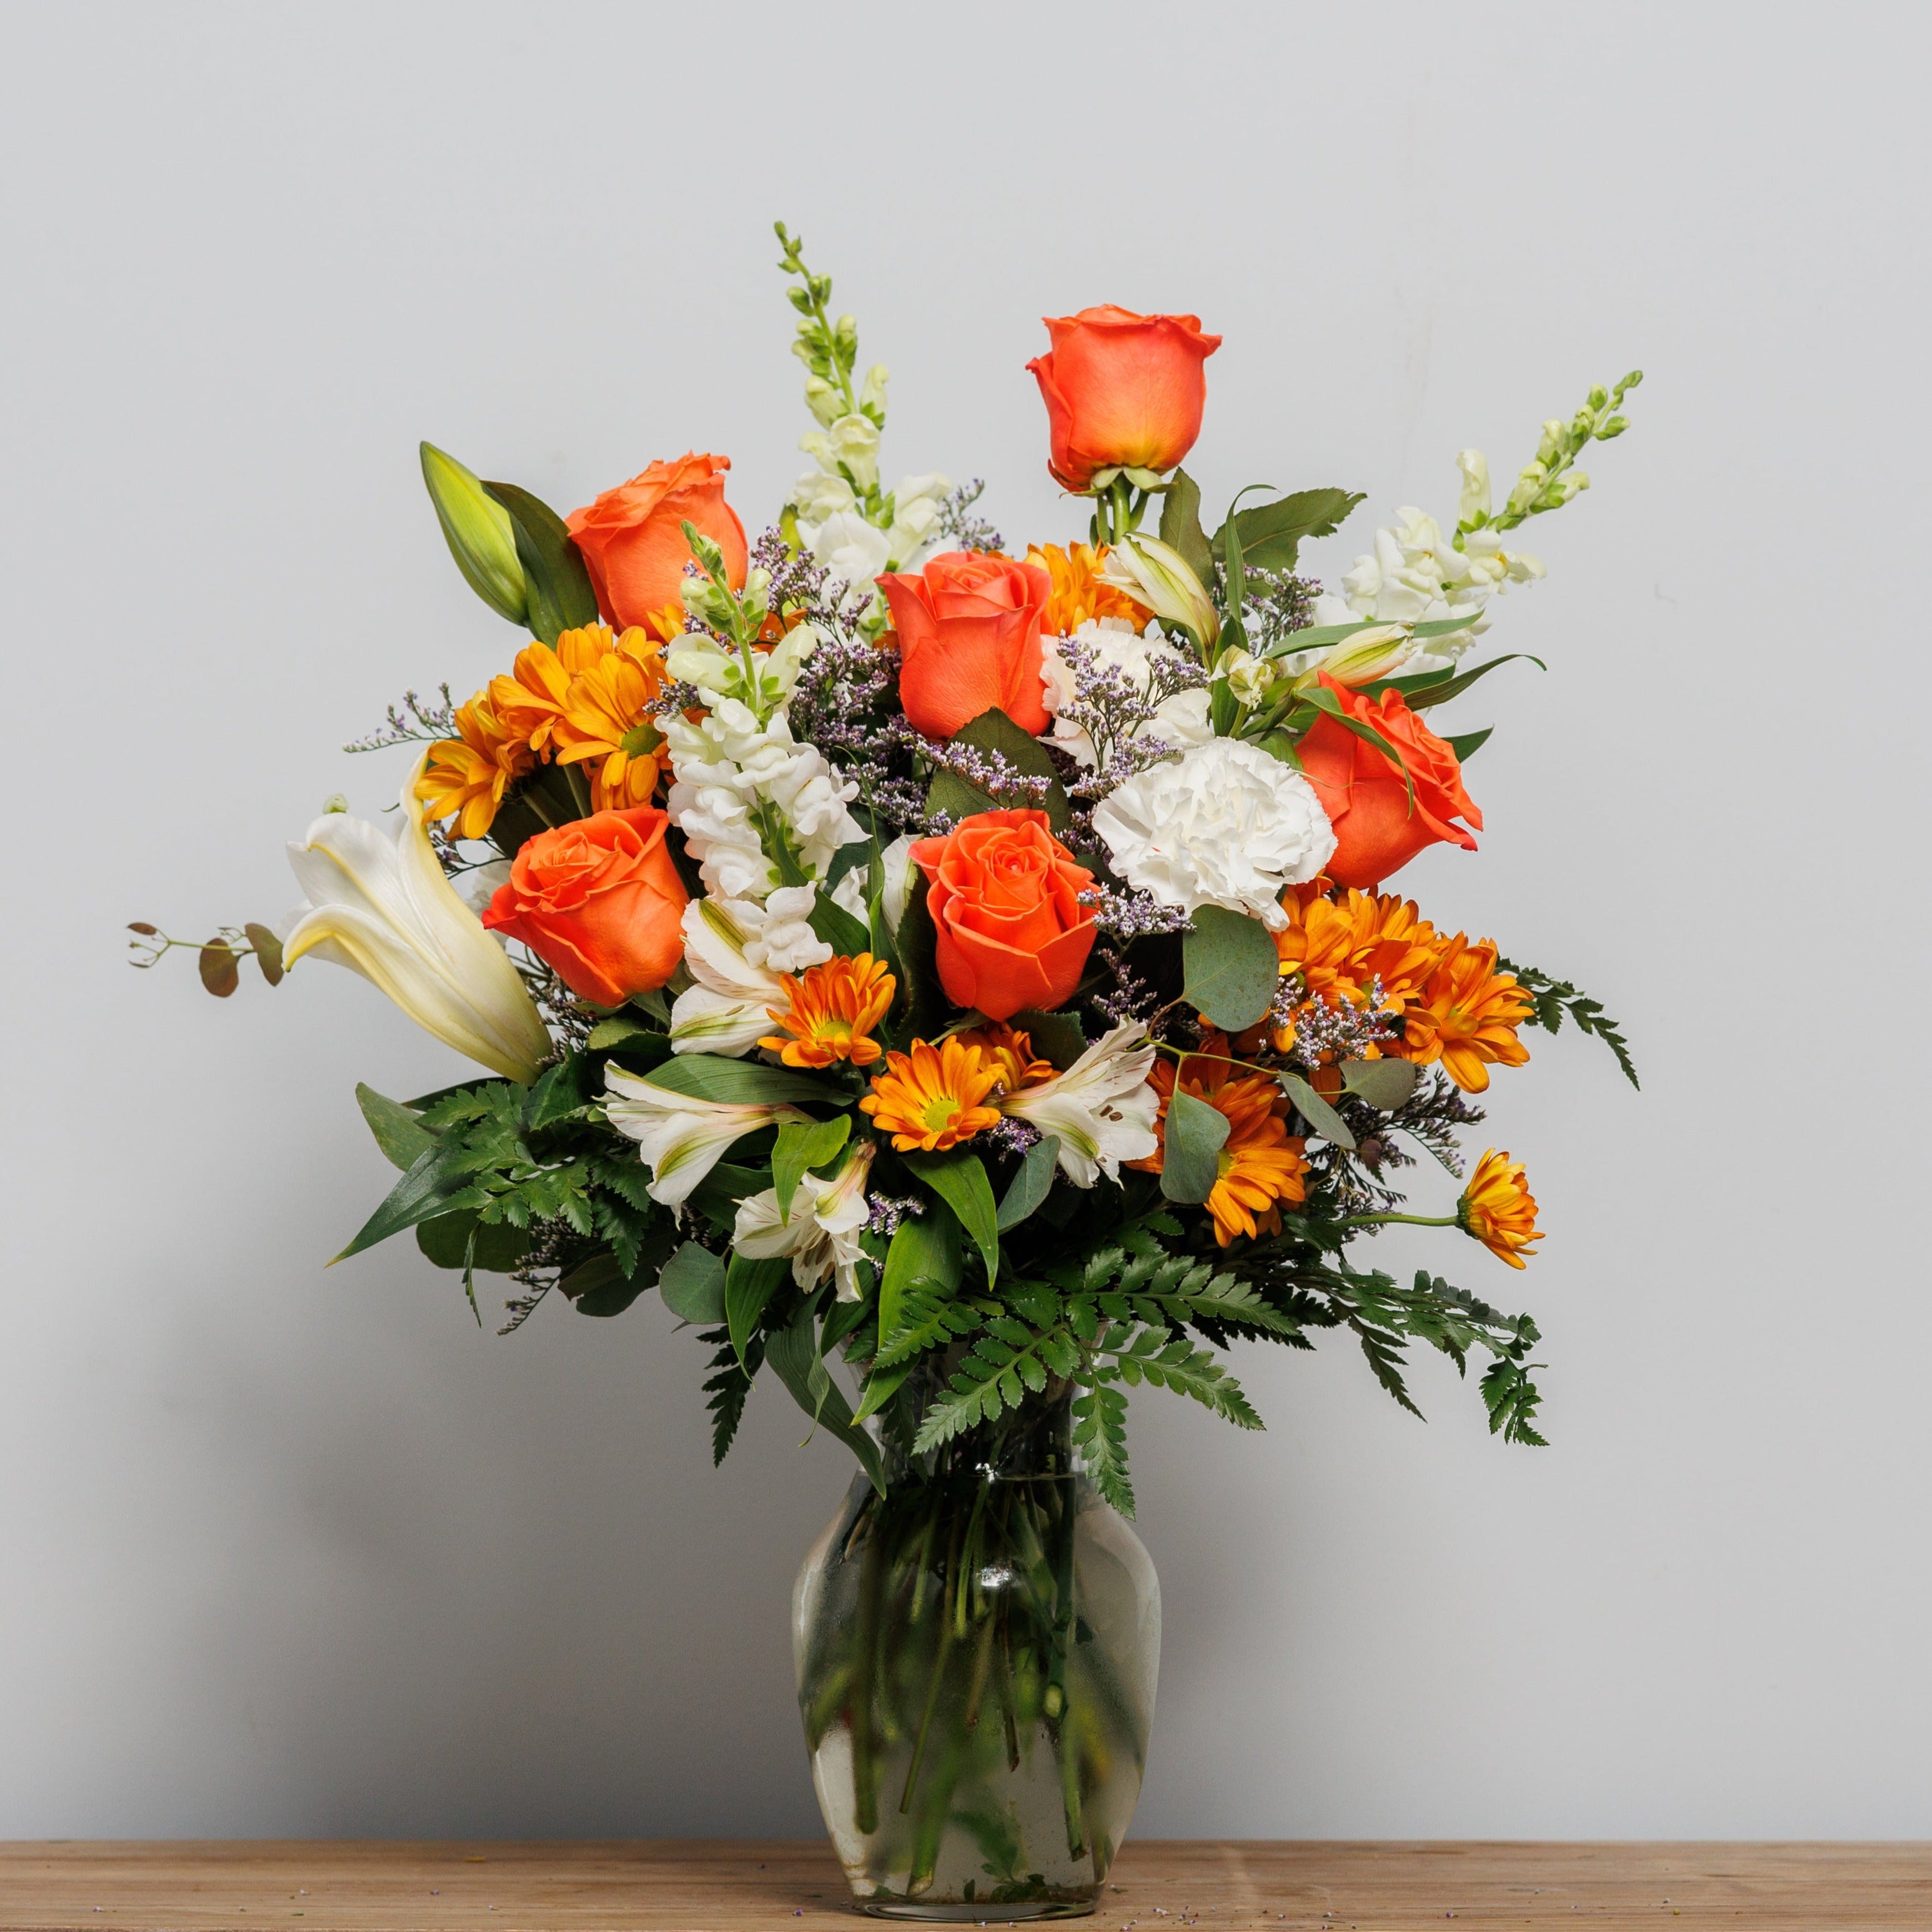 A vase arrangement with white lilies and white snap dragons and orange roses.